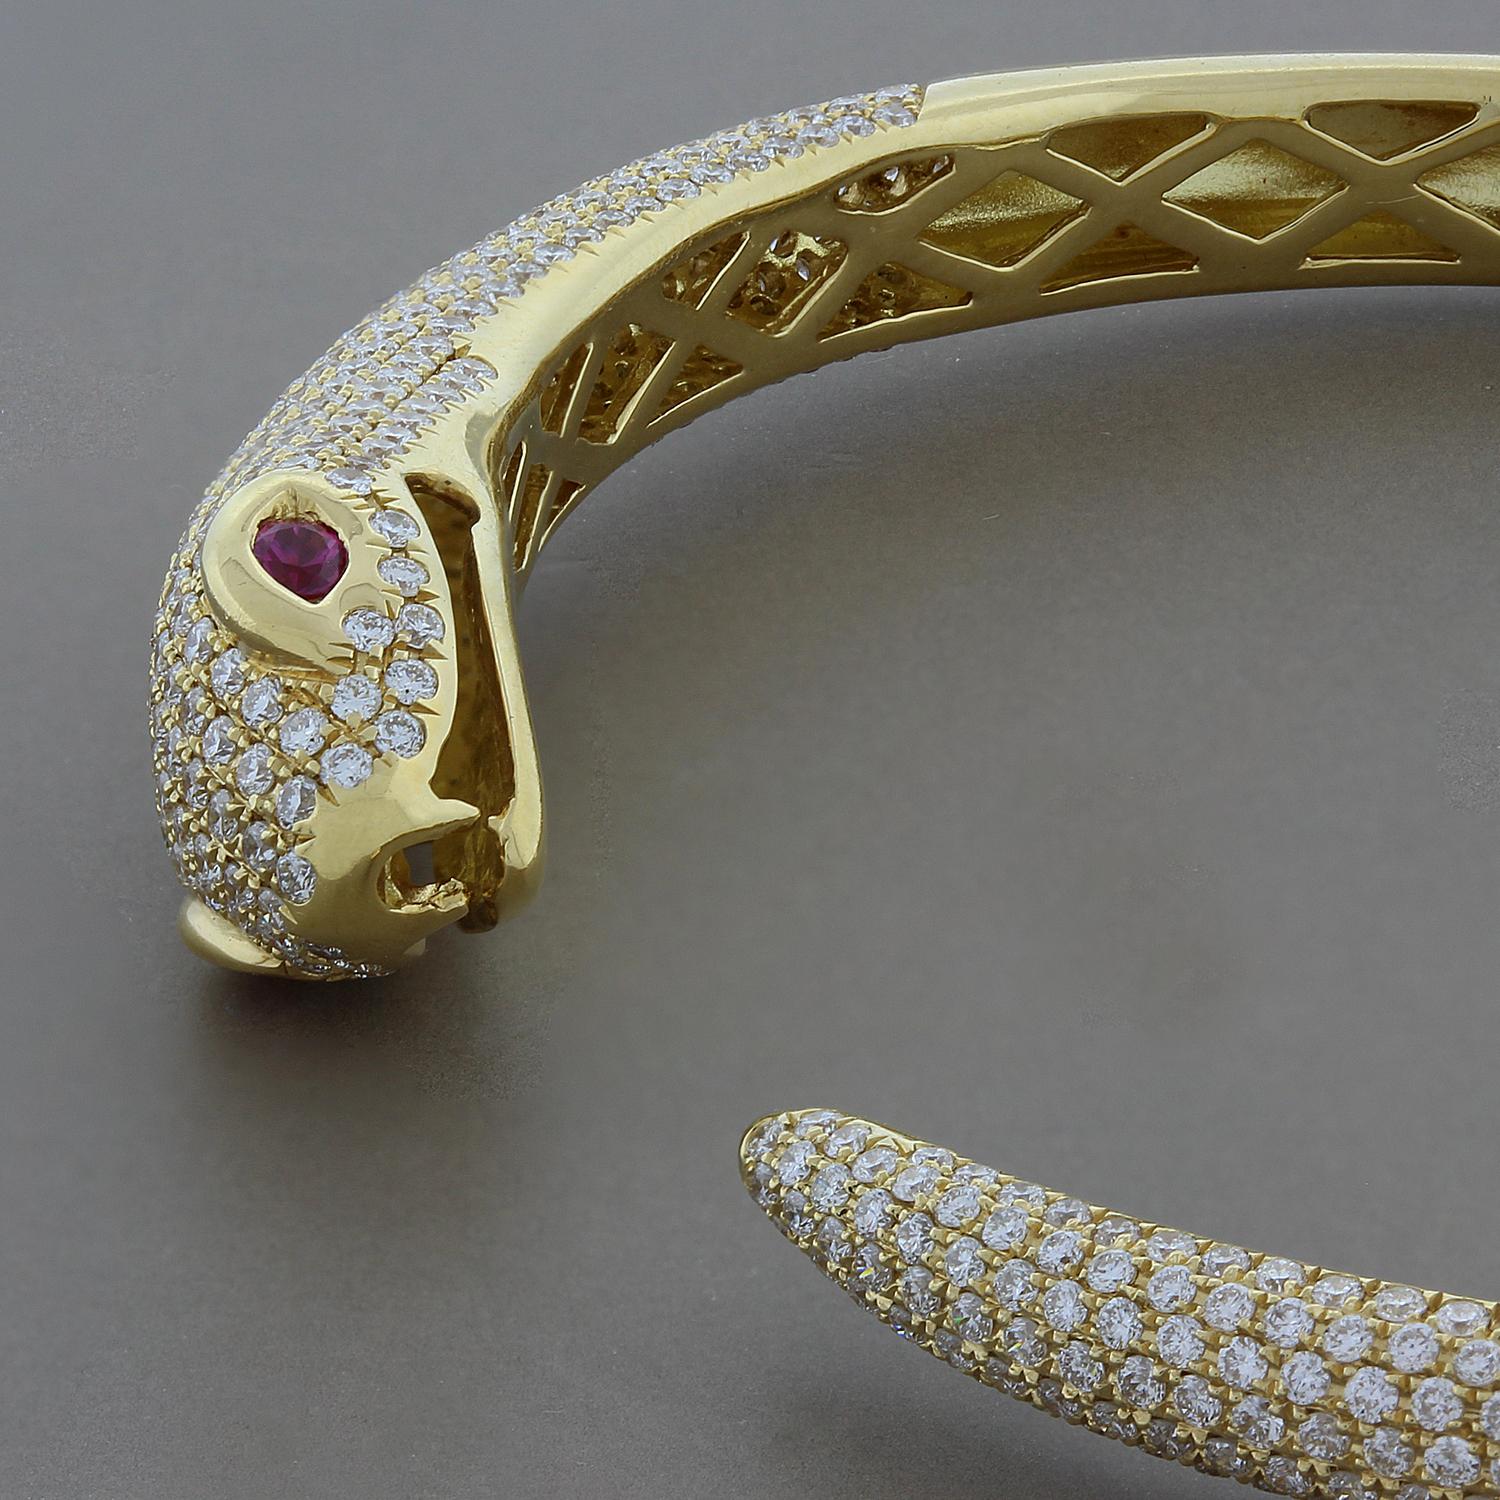 This hissing snake features 2.63 carats of round pave diamonds with 0.11 carats of ruby eyes. Set in 18K yellow gold, this cuff opens with ease as it is comfortable.

Fits wrists up to 6 inches
